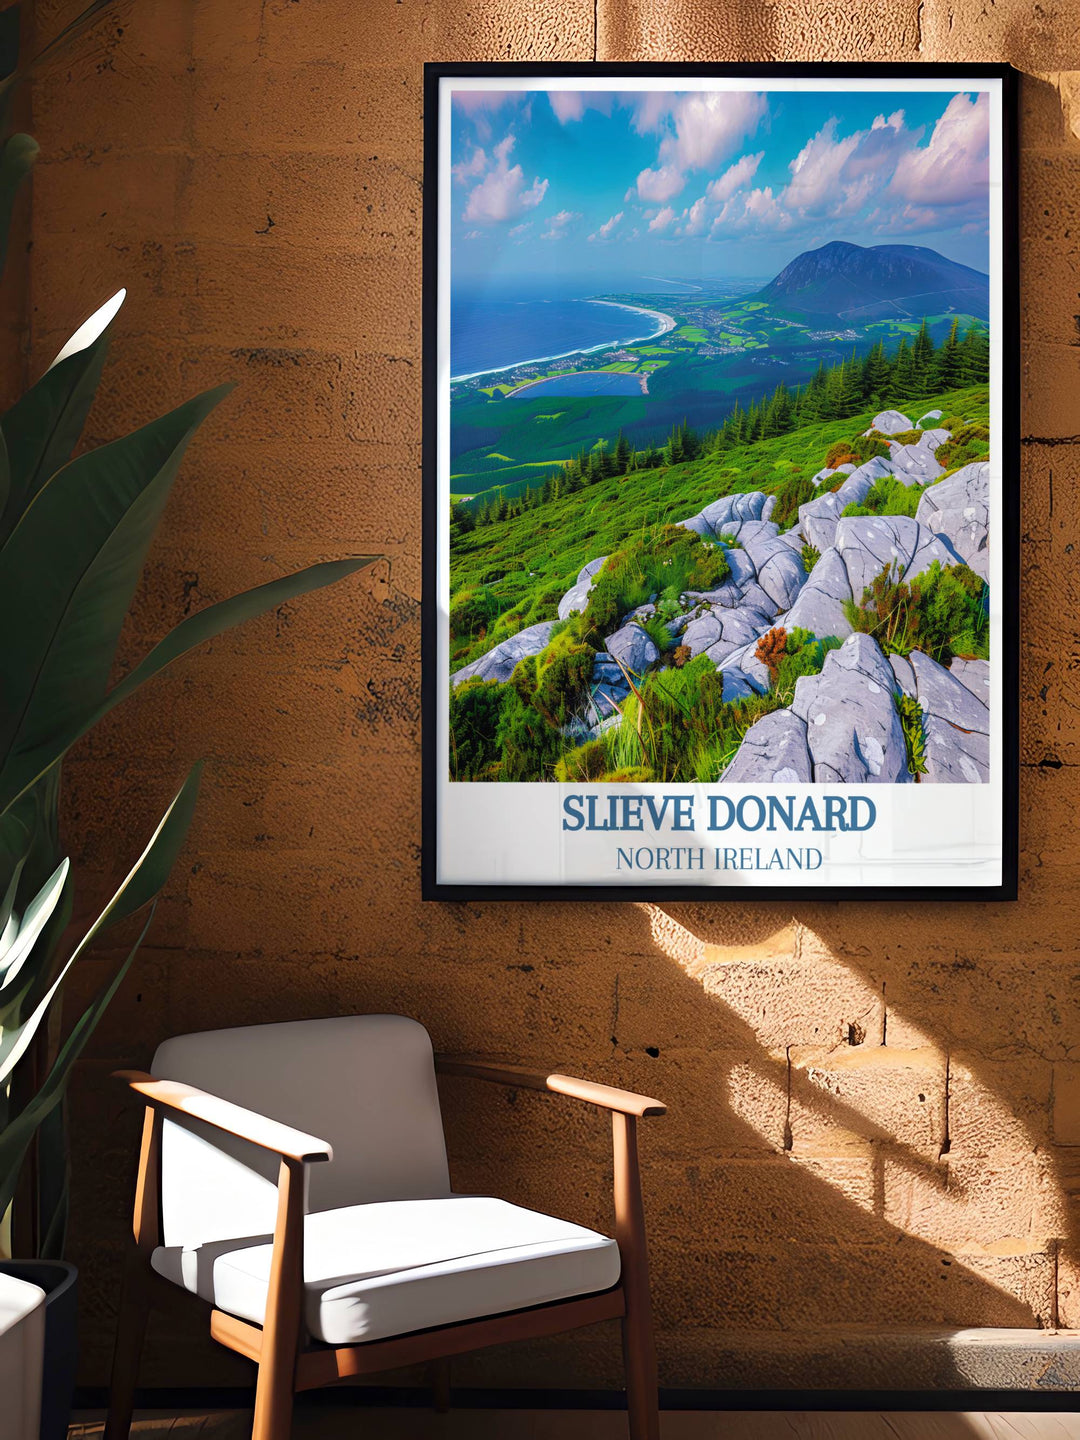 Ireland travel prints featuring Slieve Donard bring the scenic beauty of Northern Ireland to life. The lush greenery, dramatic skies, and majestic peaks are depicted in exquisite detail, making these prints a must have for any nature enthusiast.